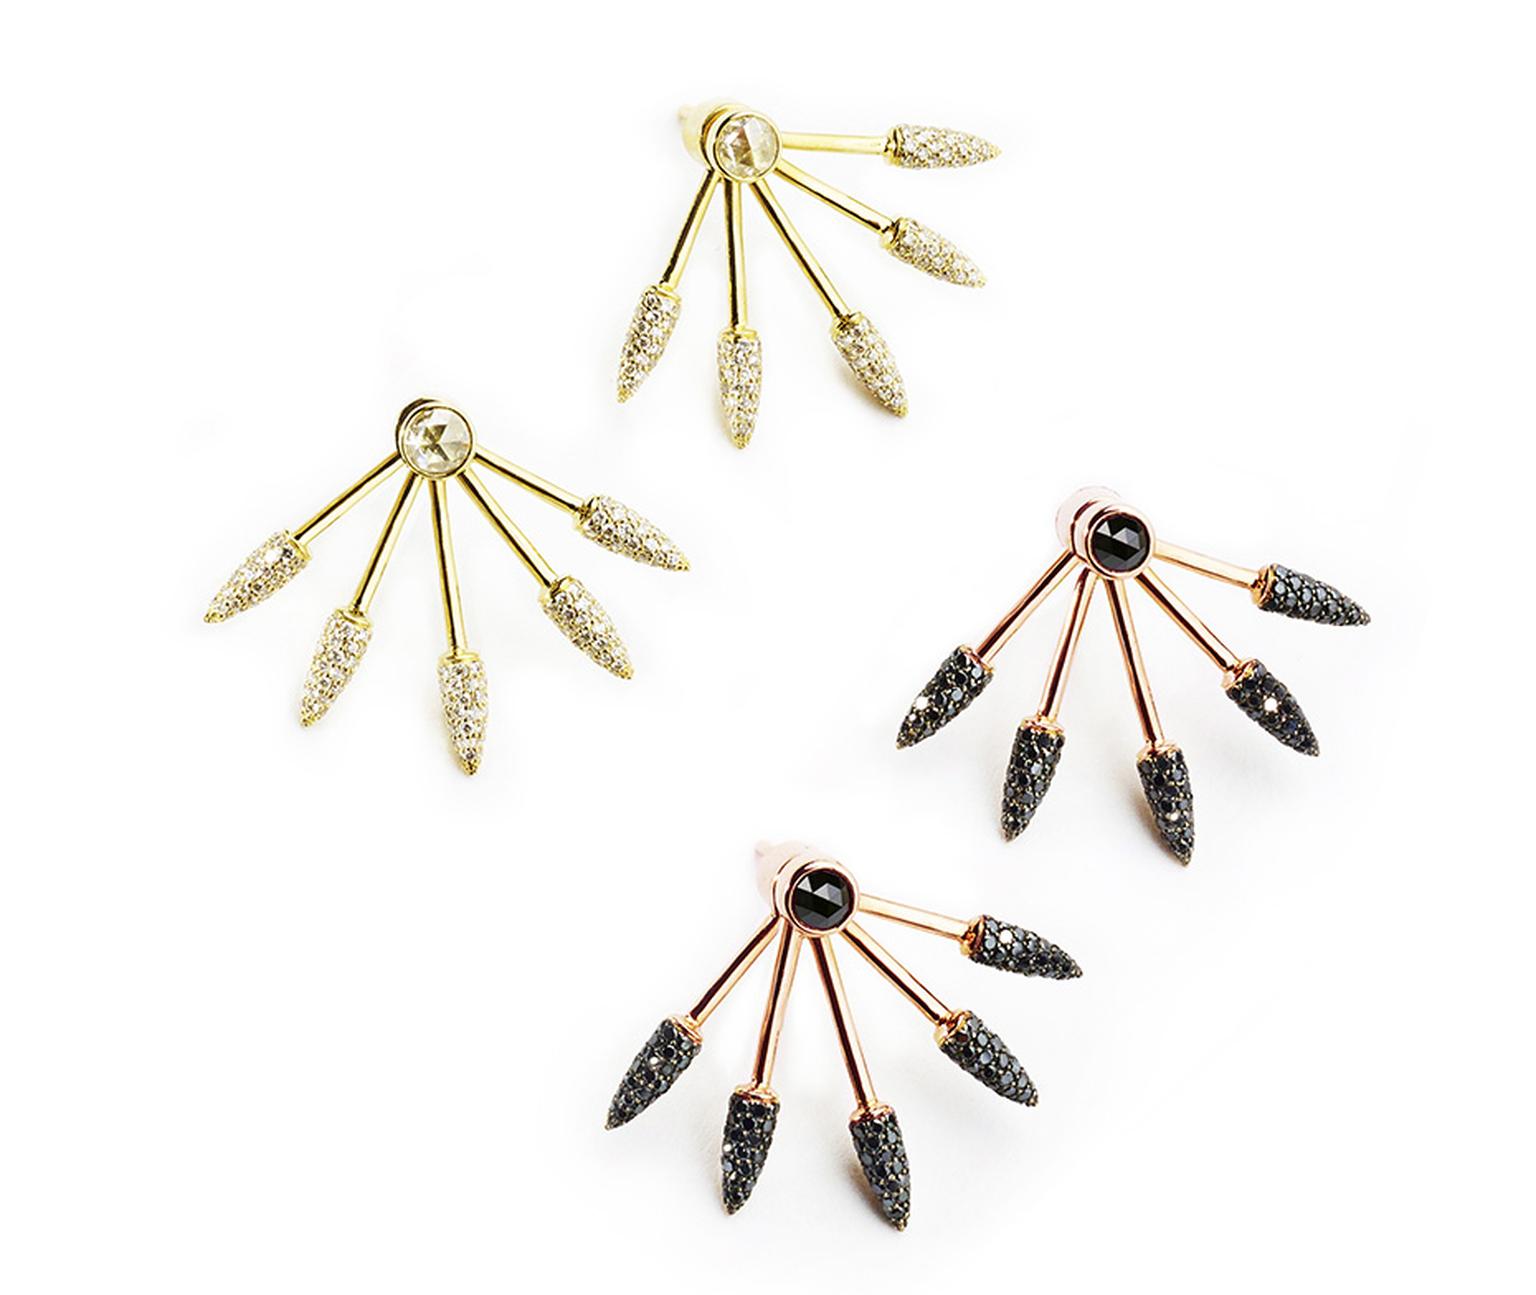 Pamela Love Fine Five Spike Earrings in yellow gold, with a rose-cut white diamond and pavé diamond spikes, and rose gold with a full-cut black diamond and pavé black diamond spikes